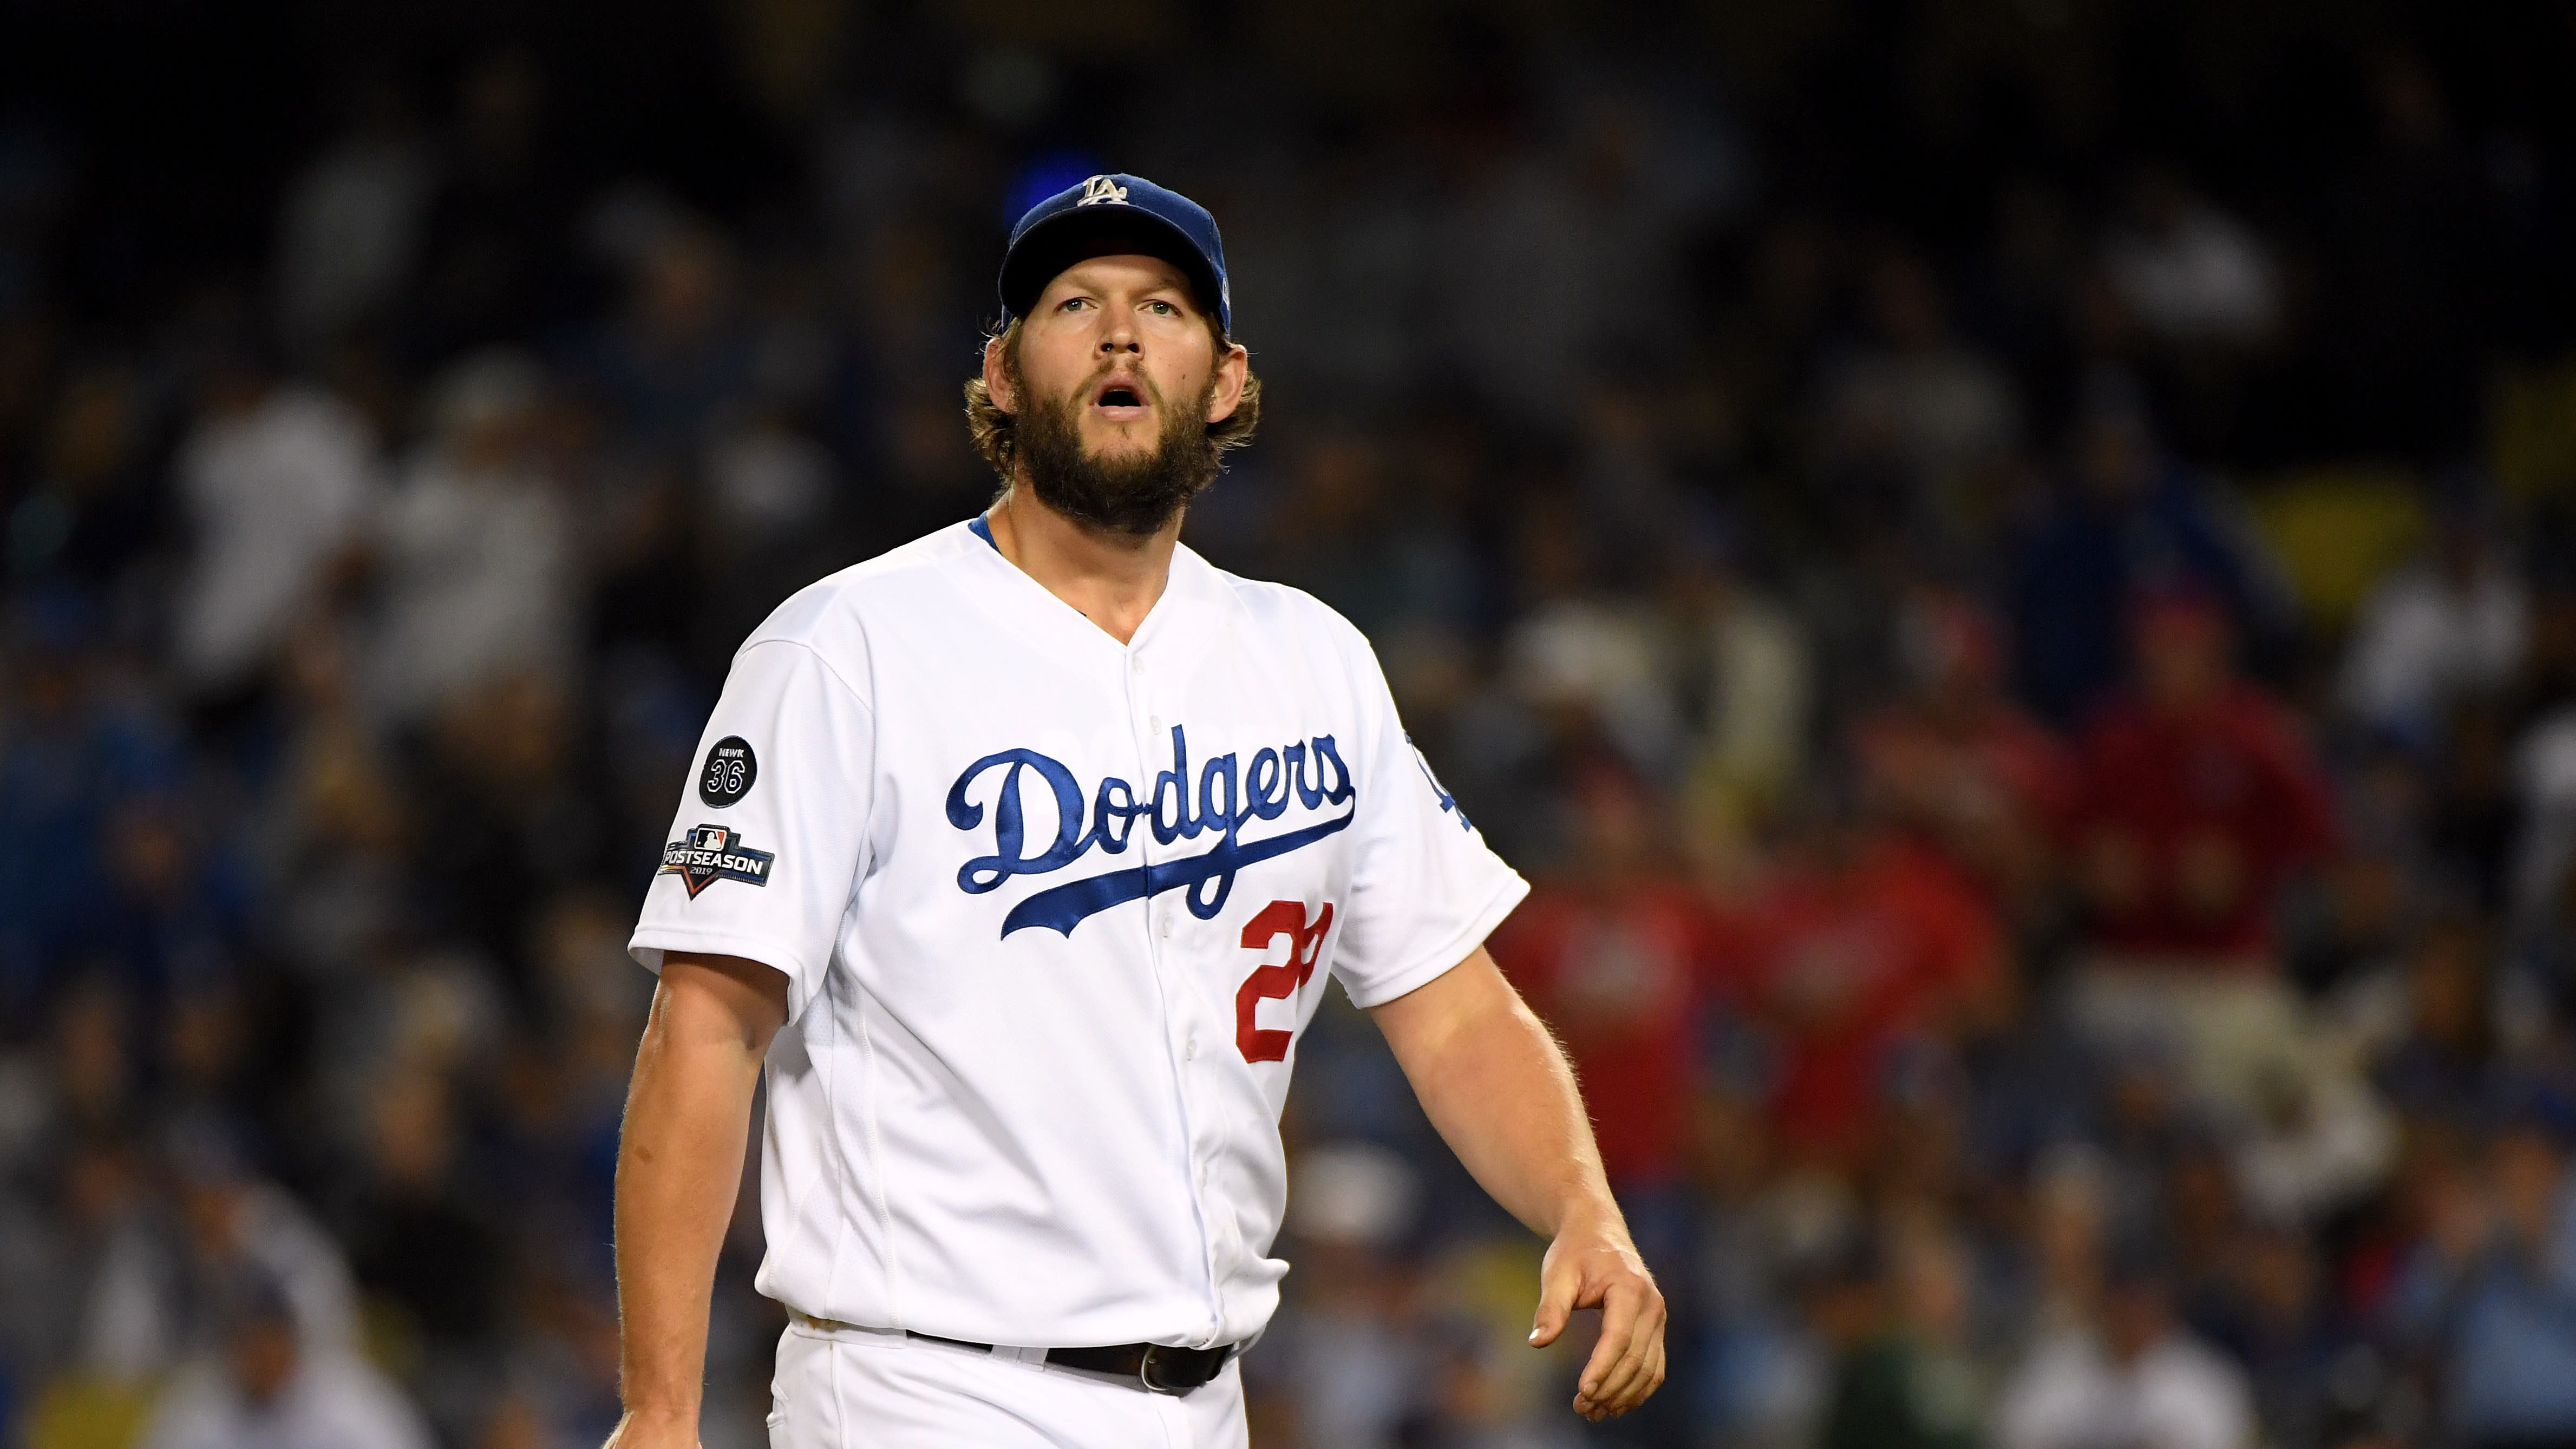 MLB Cancels 2020 All-Star Game, Dodgers Awarded 2022 Game – SportsLogos.Net  News